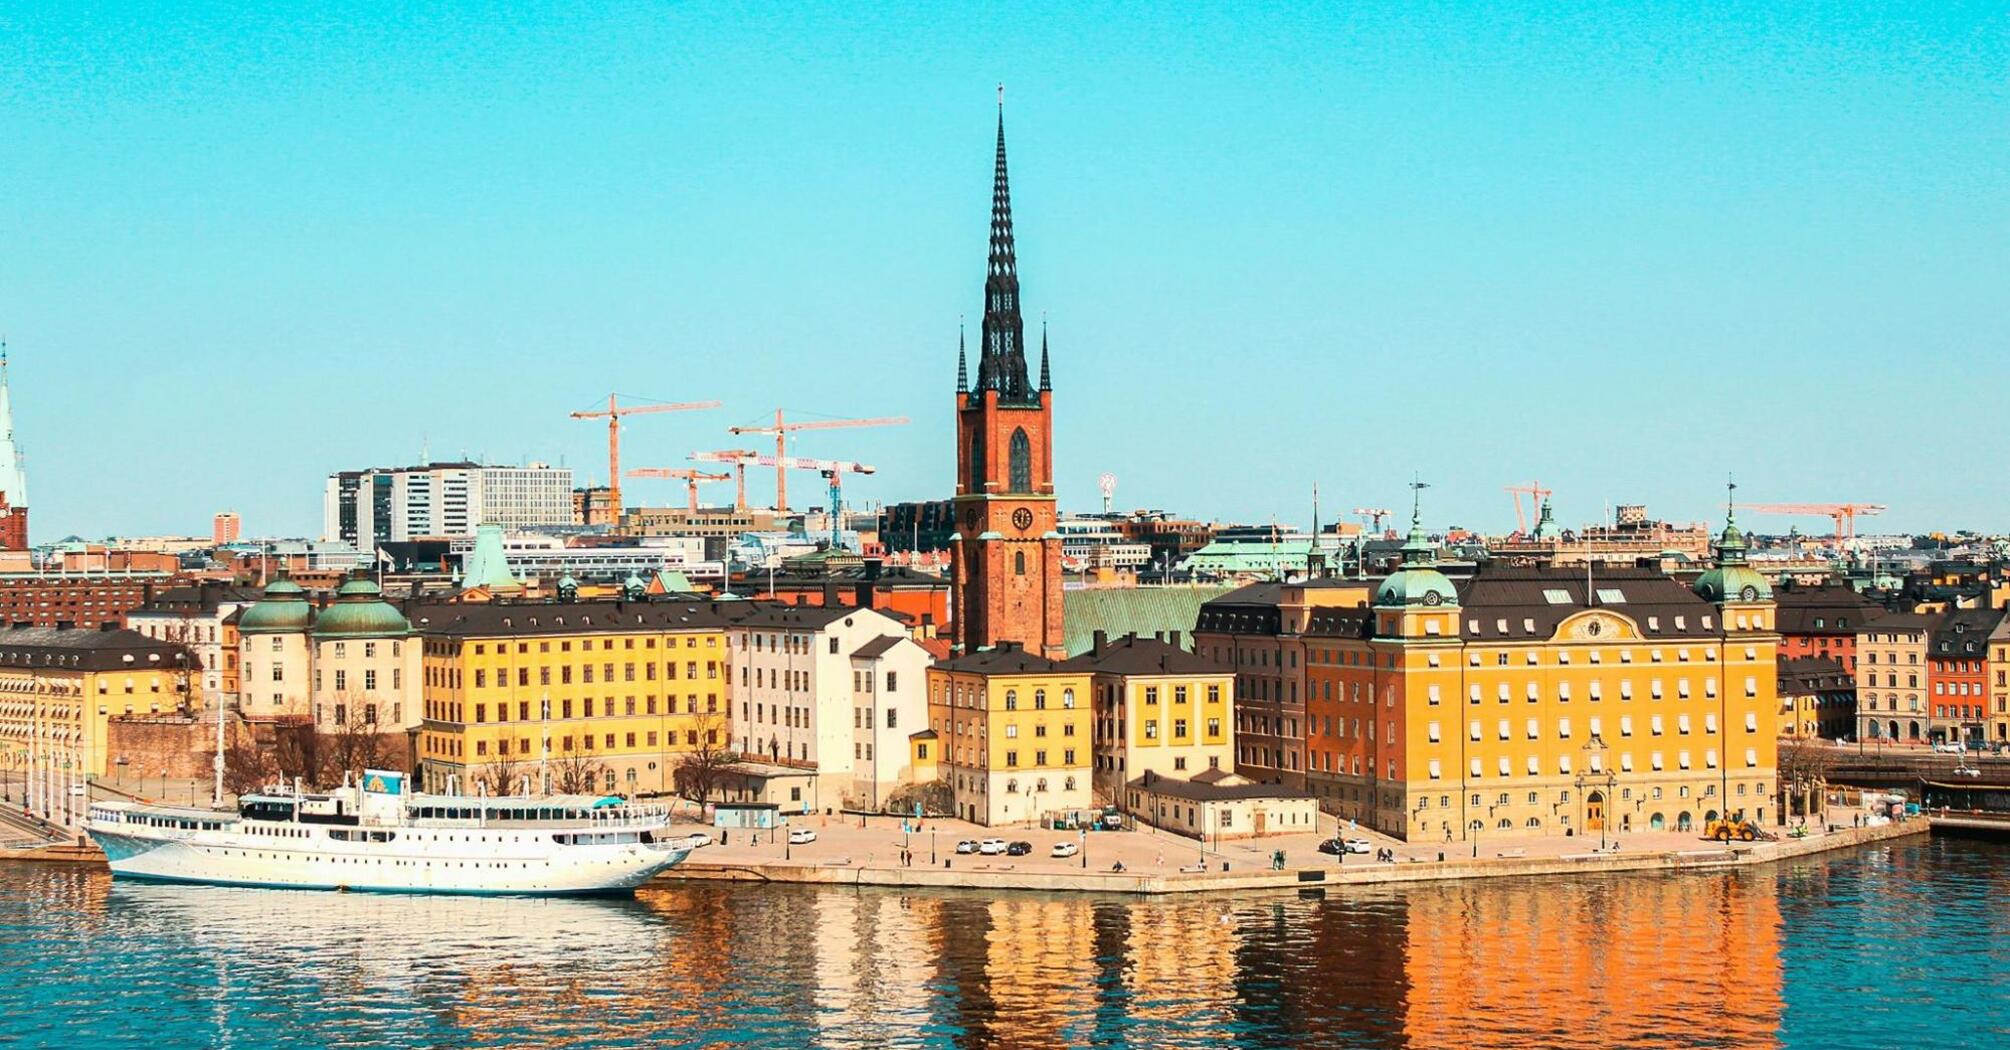 The city center of Stockholm by the river